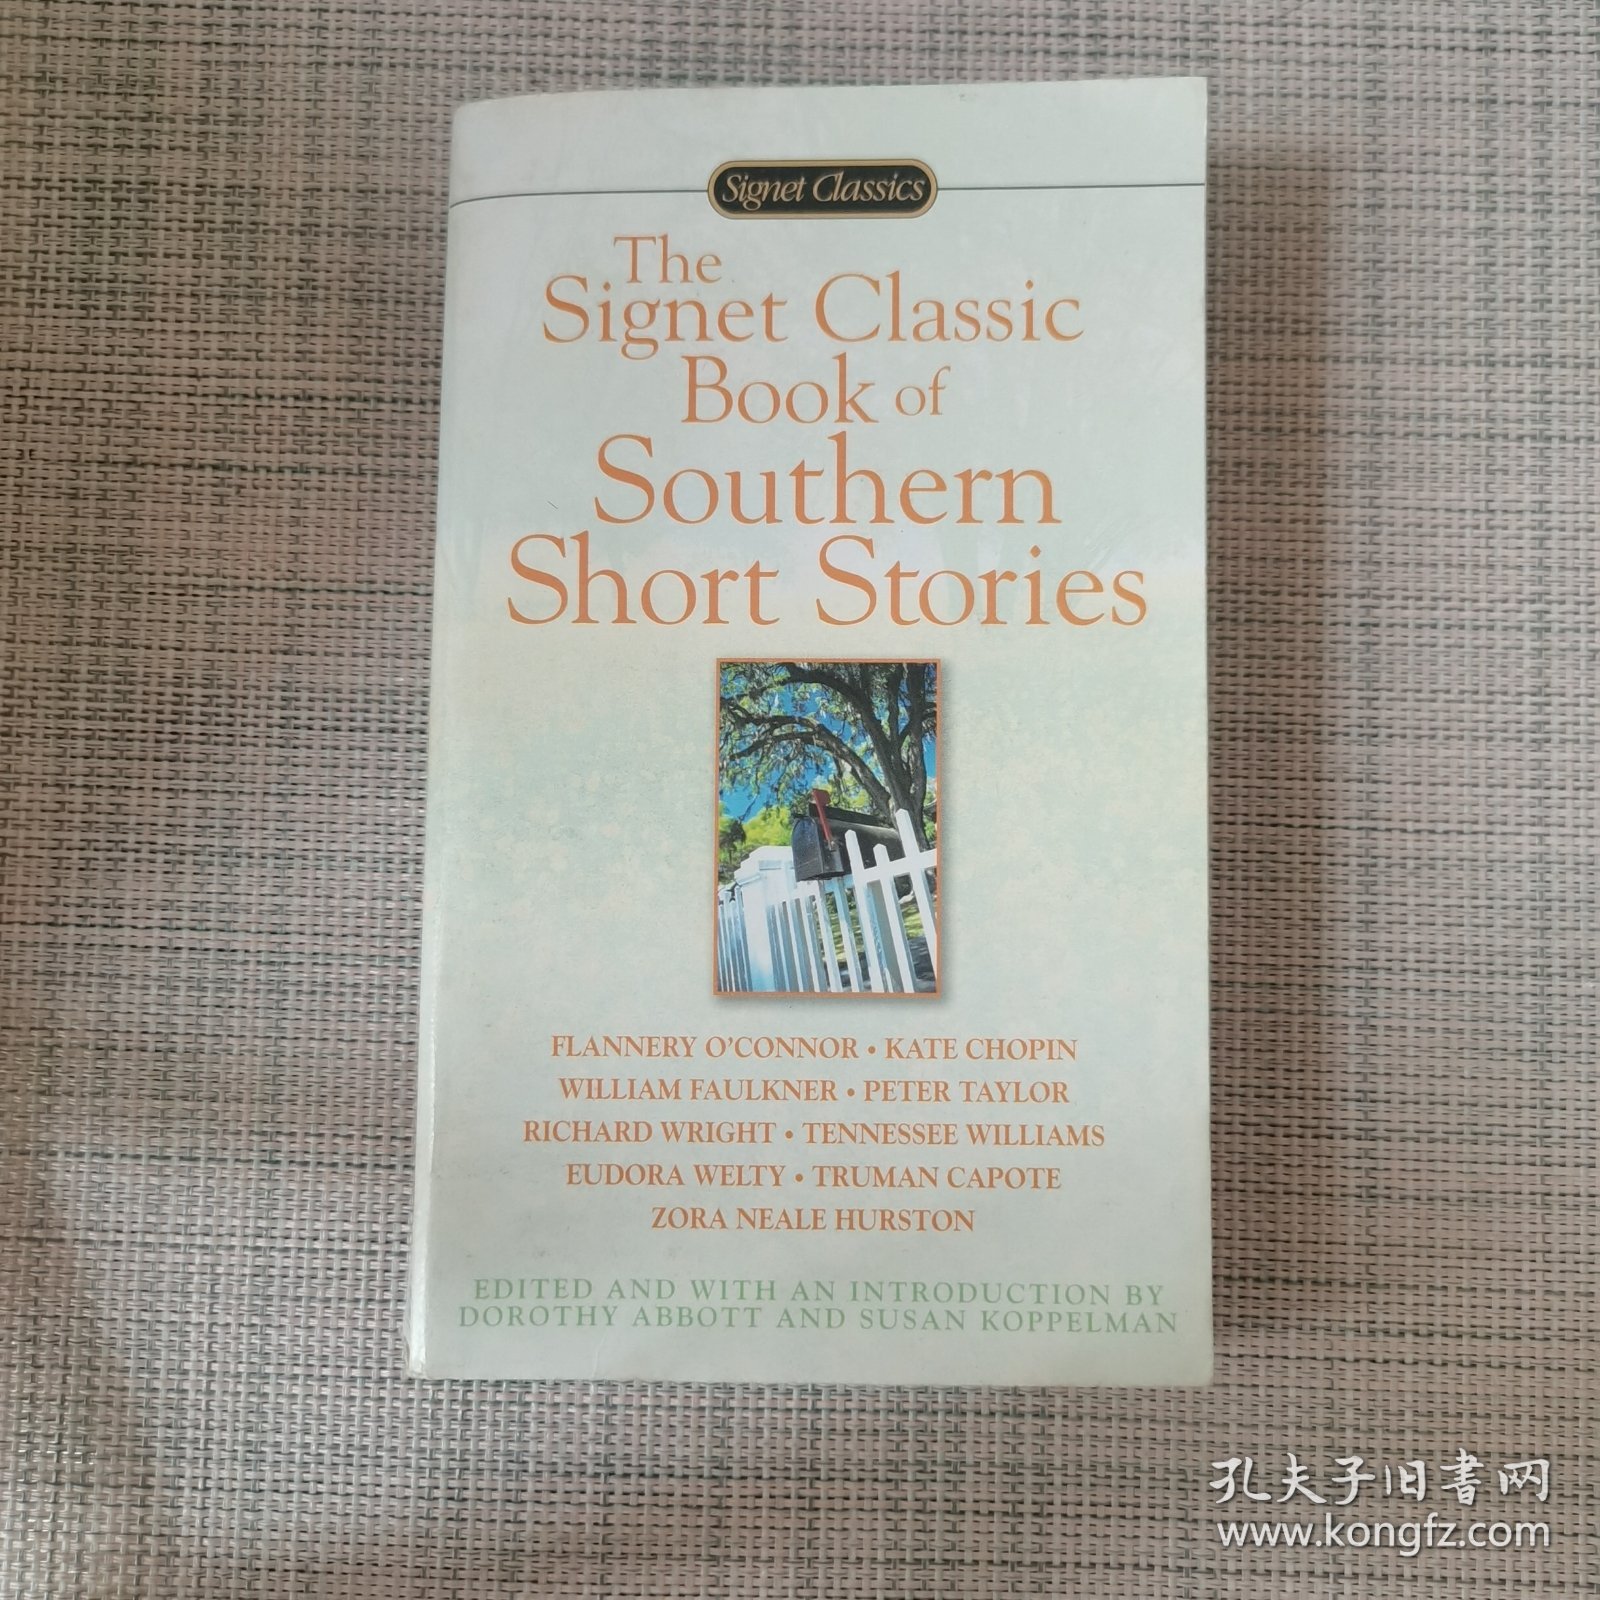 The Signet classic book of Southern short stories